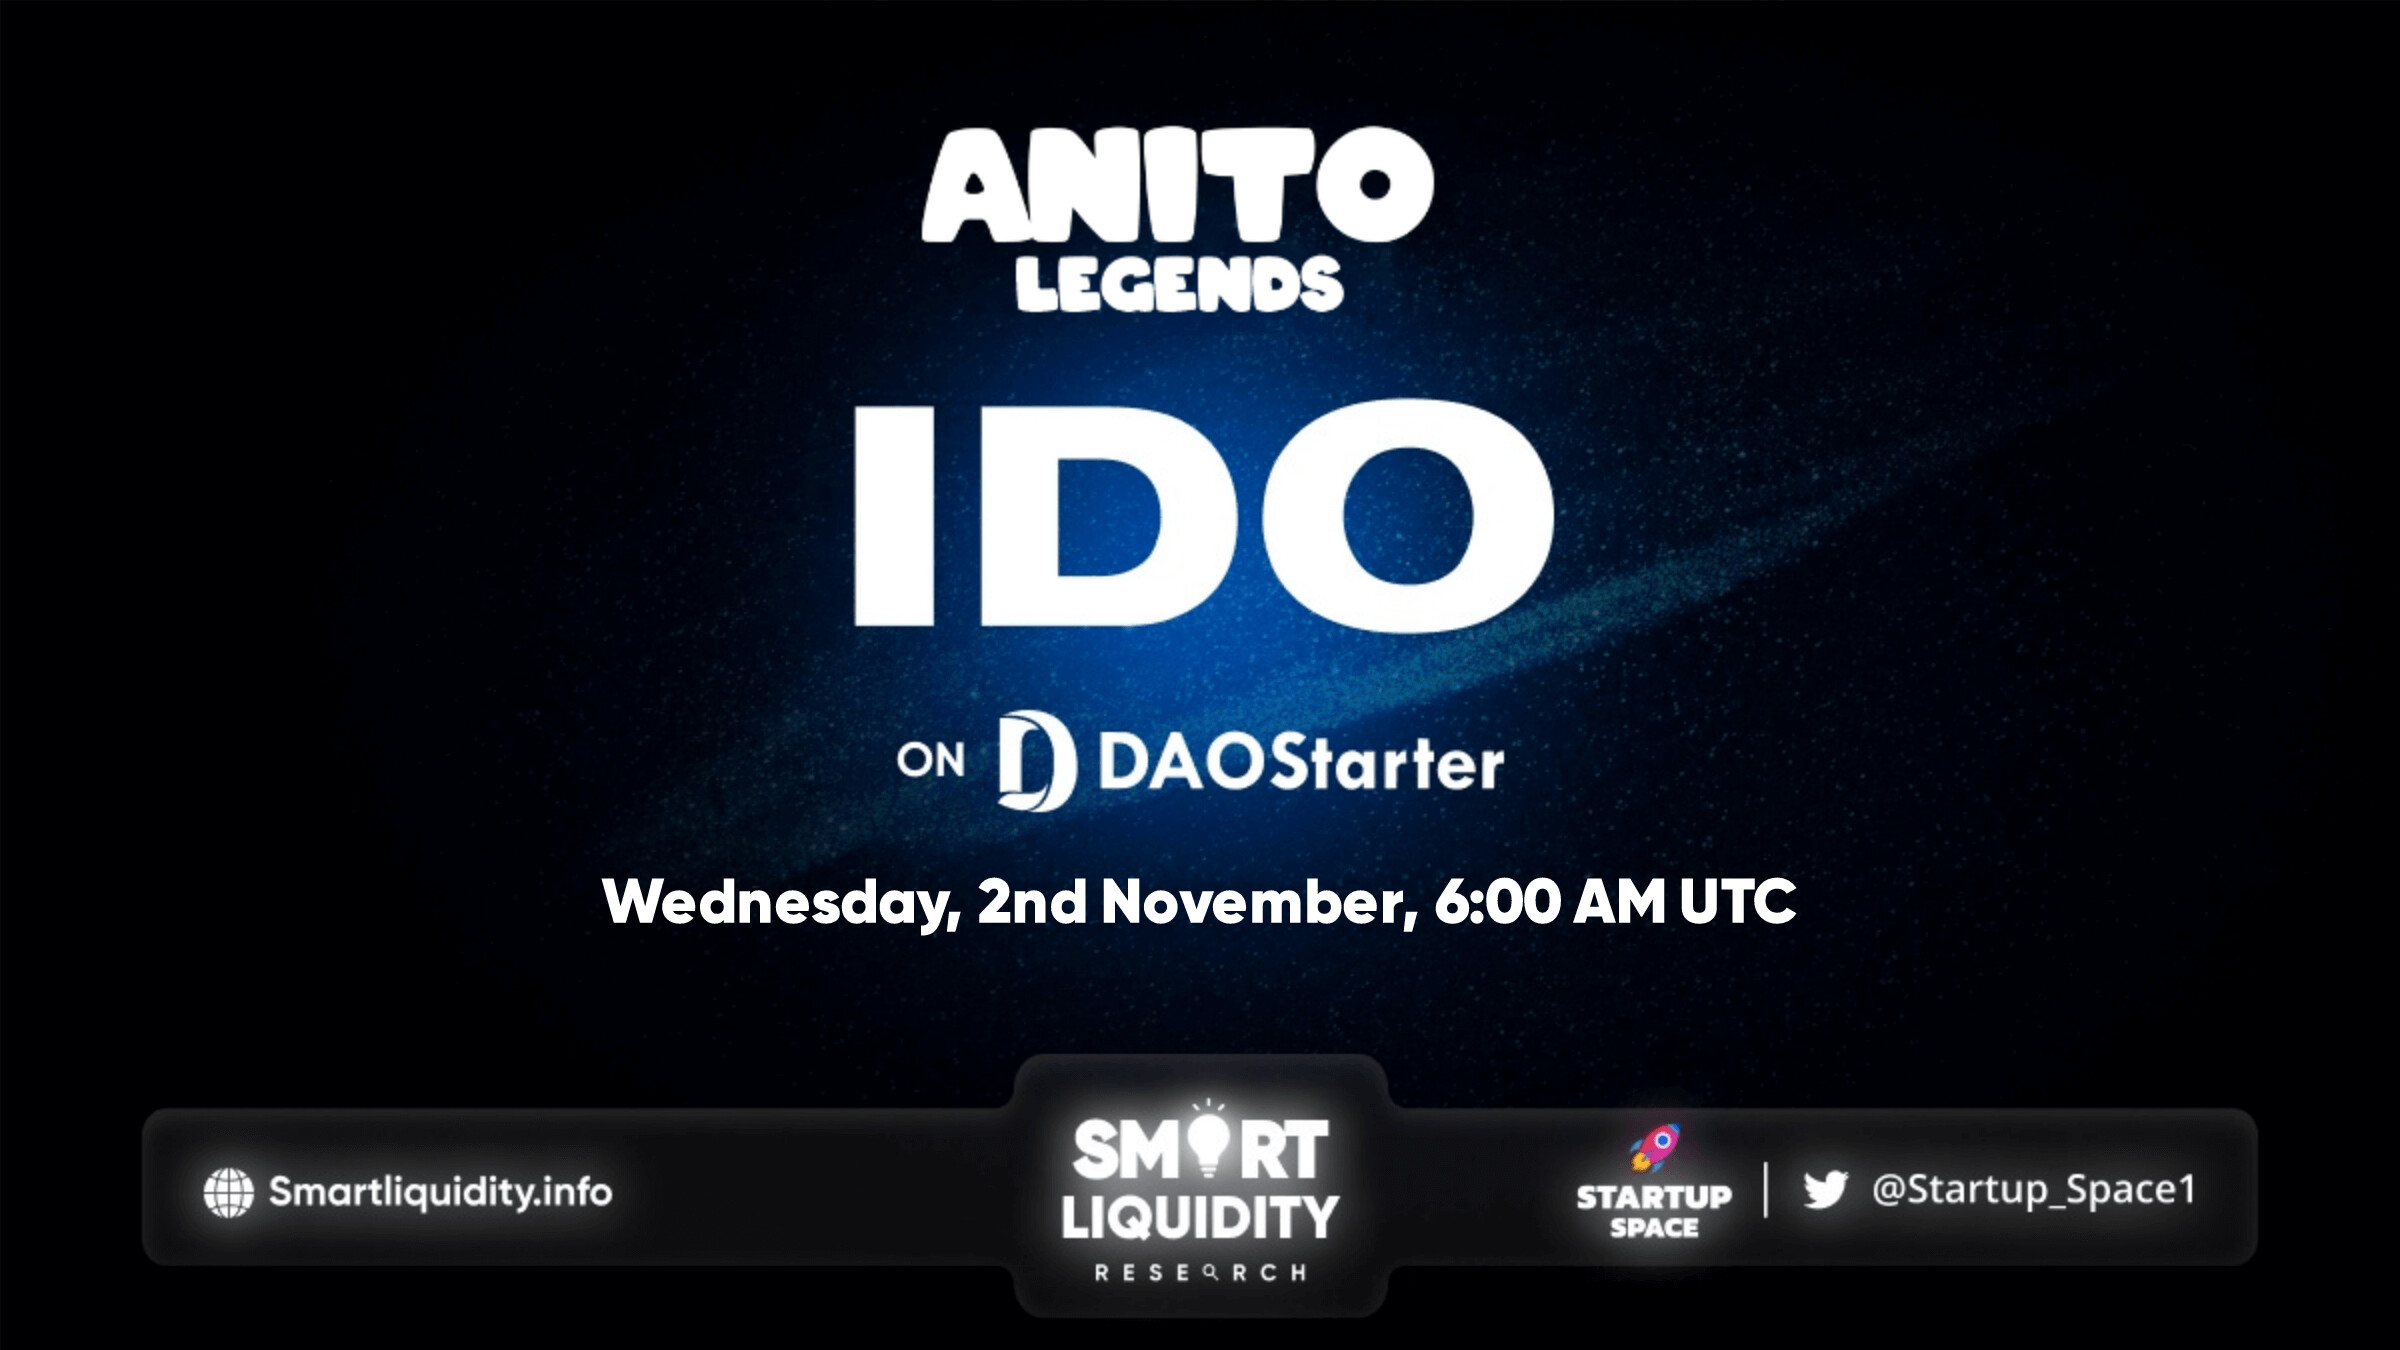 Anito Legends Upcoming IDO on DAOStarter